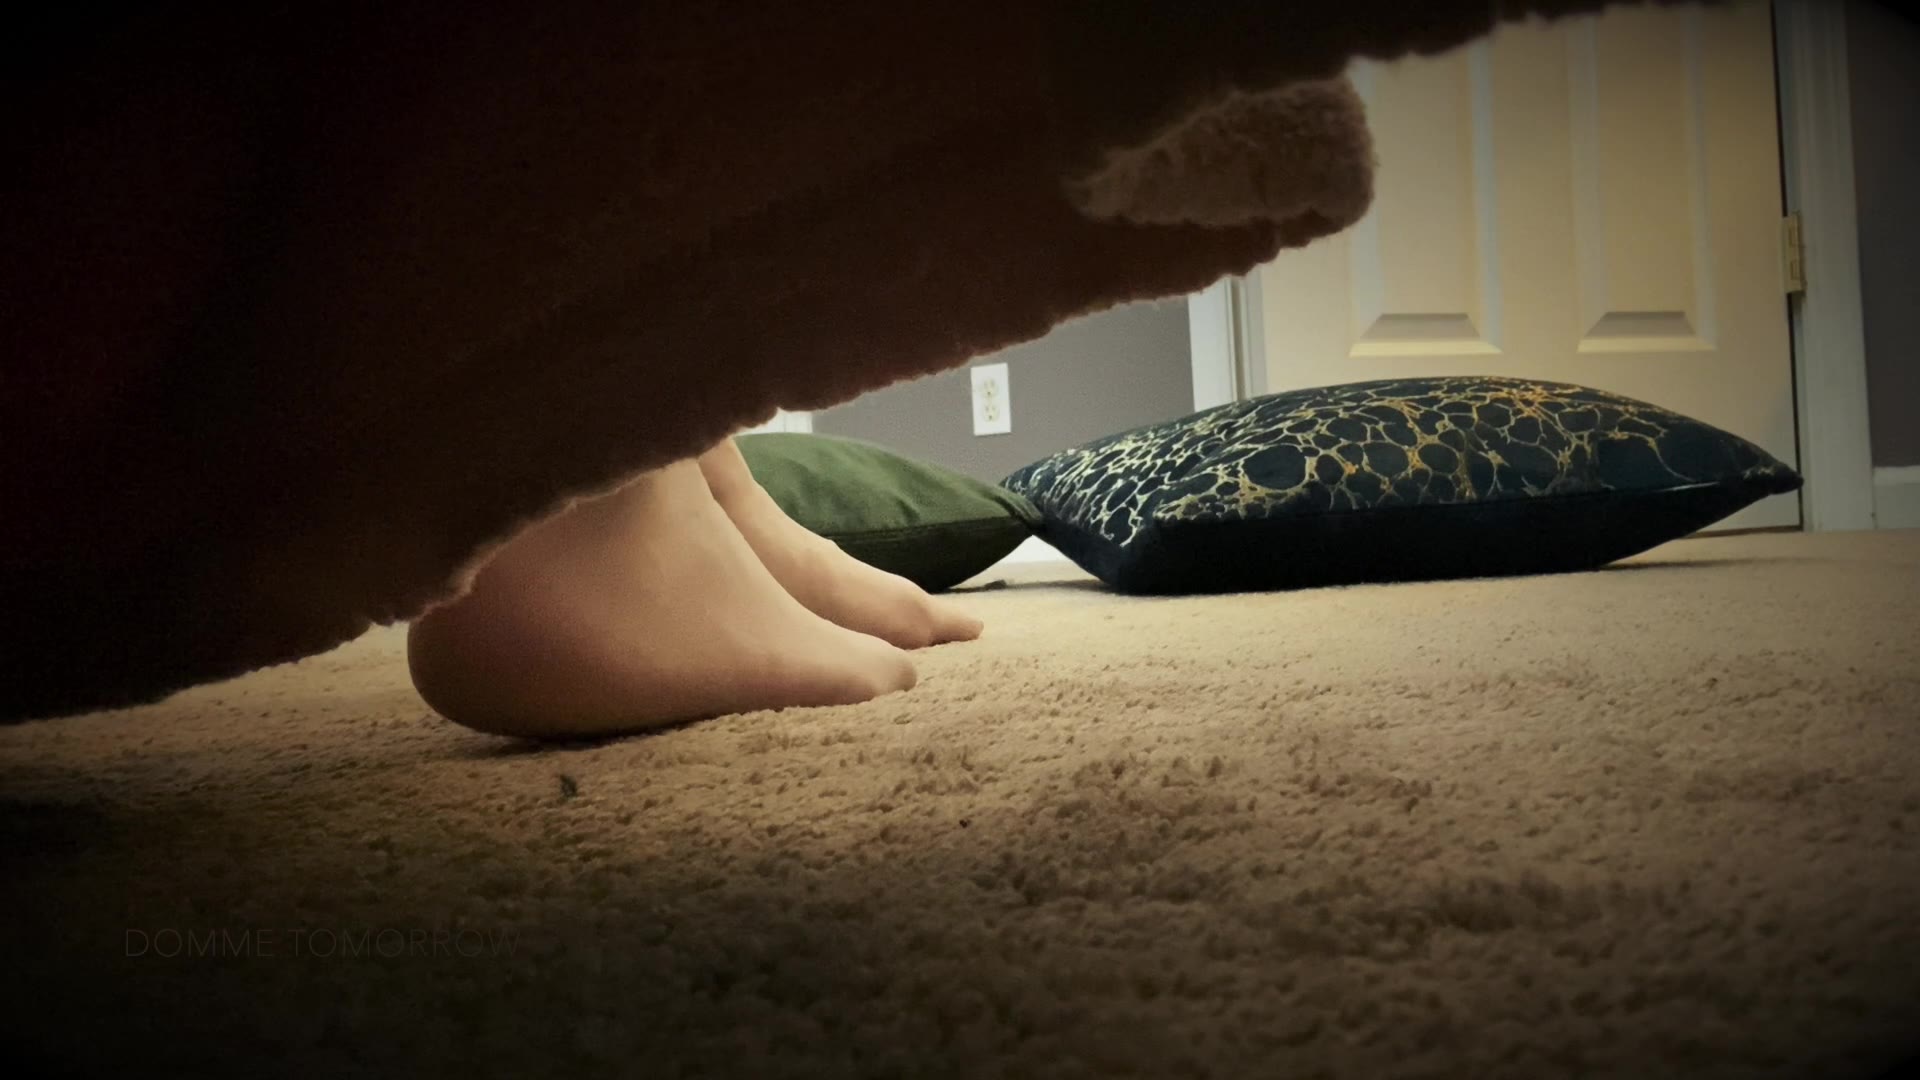 DommeTomorrow - Cuck Under The Bed